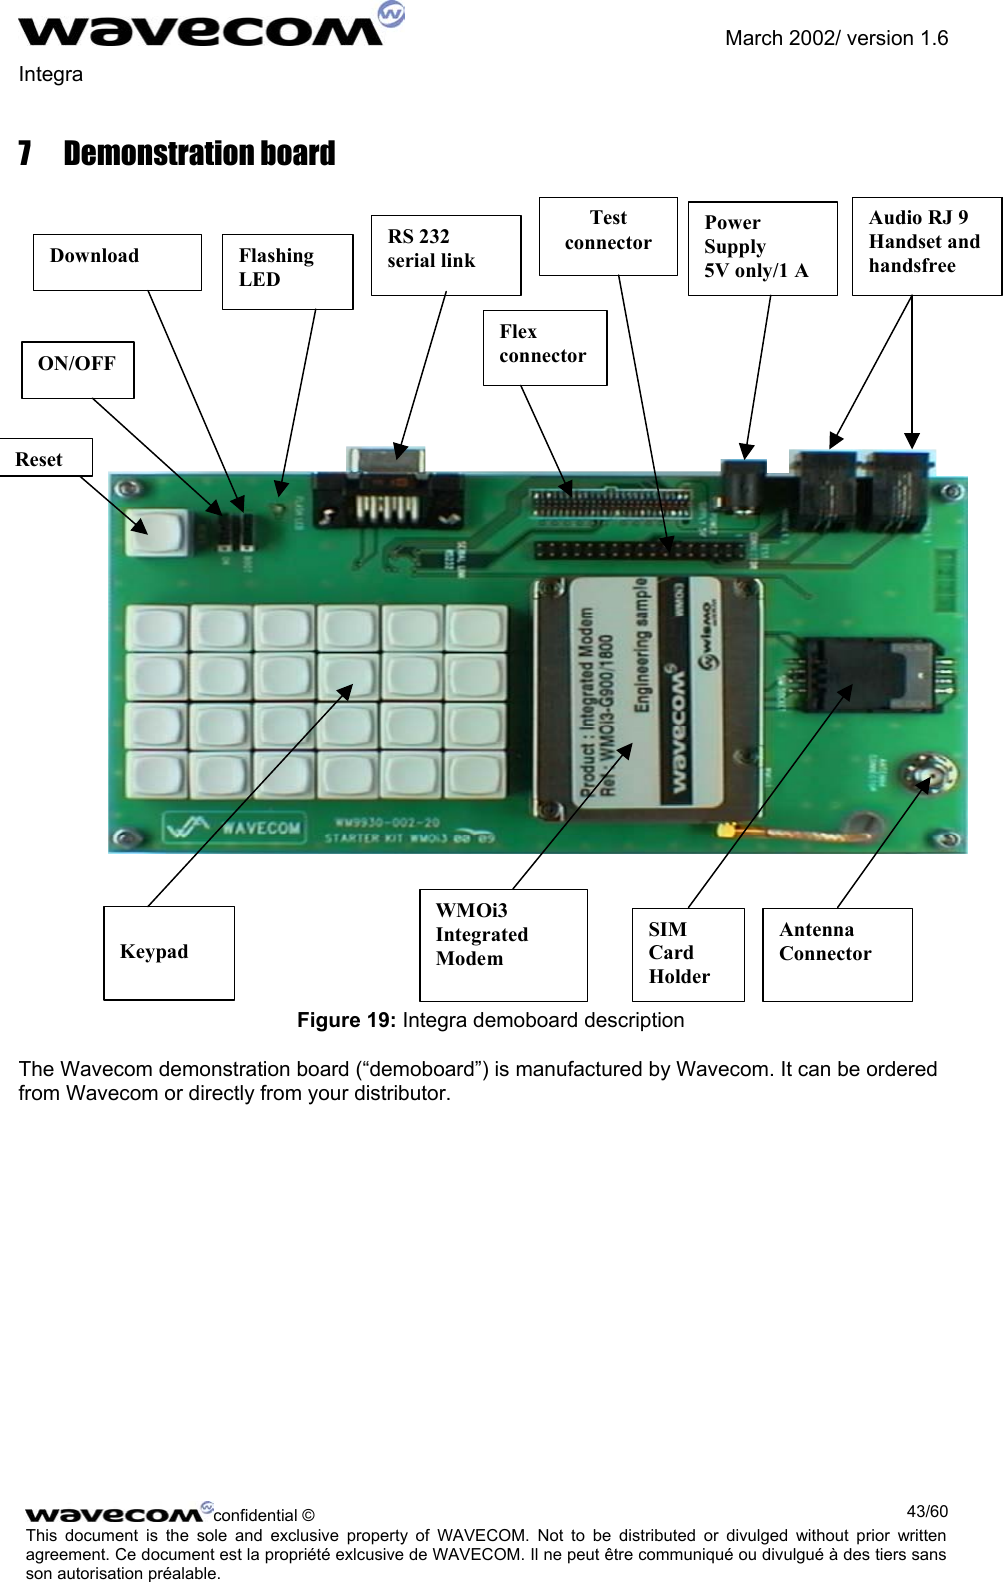               March 2002/ version 1.6 Integra   7 Demonstration board KeypadWMOi3IntegratedModemSIMCardHolderResetRS 232serial linkPowerSupply5V only/1 AAudio RJ 9Handset andhandsfreeAntennaConnectorFlexconnectorON/OFFDownloadTestconnectorFlashingLED Figure 19: Integra demoboard description  The Wavecom demonstration board (“demoboard”) is manufactured by Wavecom. It can be ordered from Wavecom or directly from your distributor. confidential ©  43/60This document is the sole and exclusive property of WAVECOM. Not to be distributed or divulged without prior written agreement. Ce document est la propriété exlcusive de WAVECOM. Il ne peut être communiqué ou divulgué à des tiers sans son autorisation préalable.  